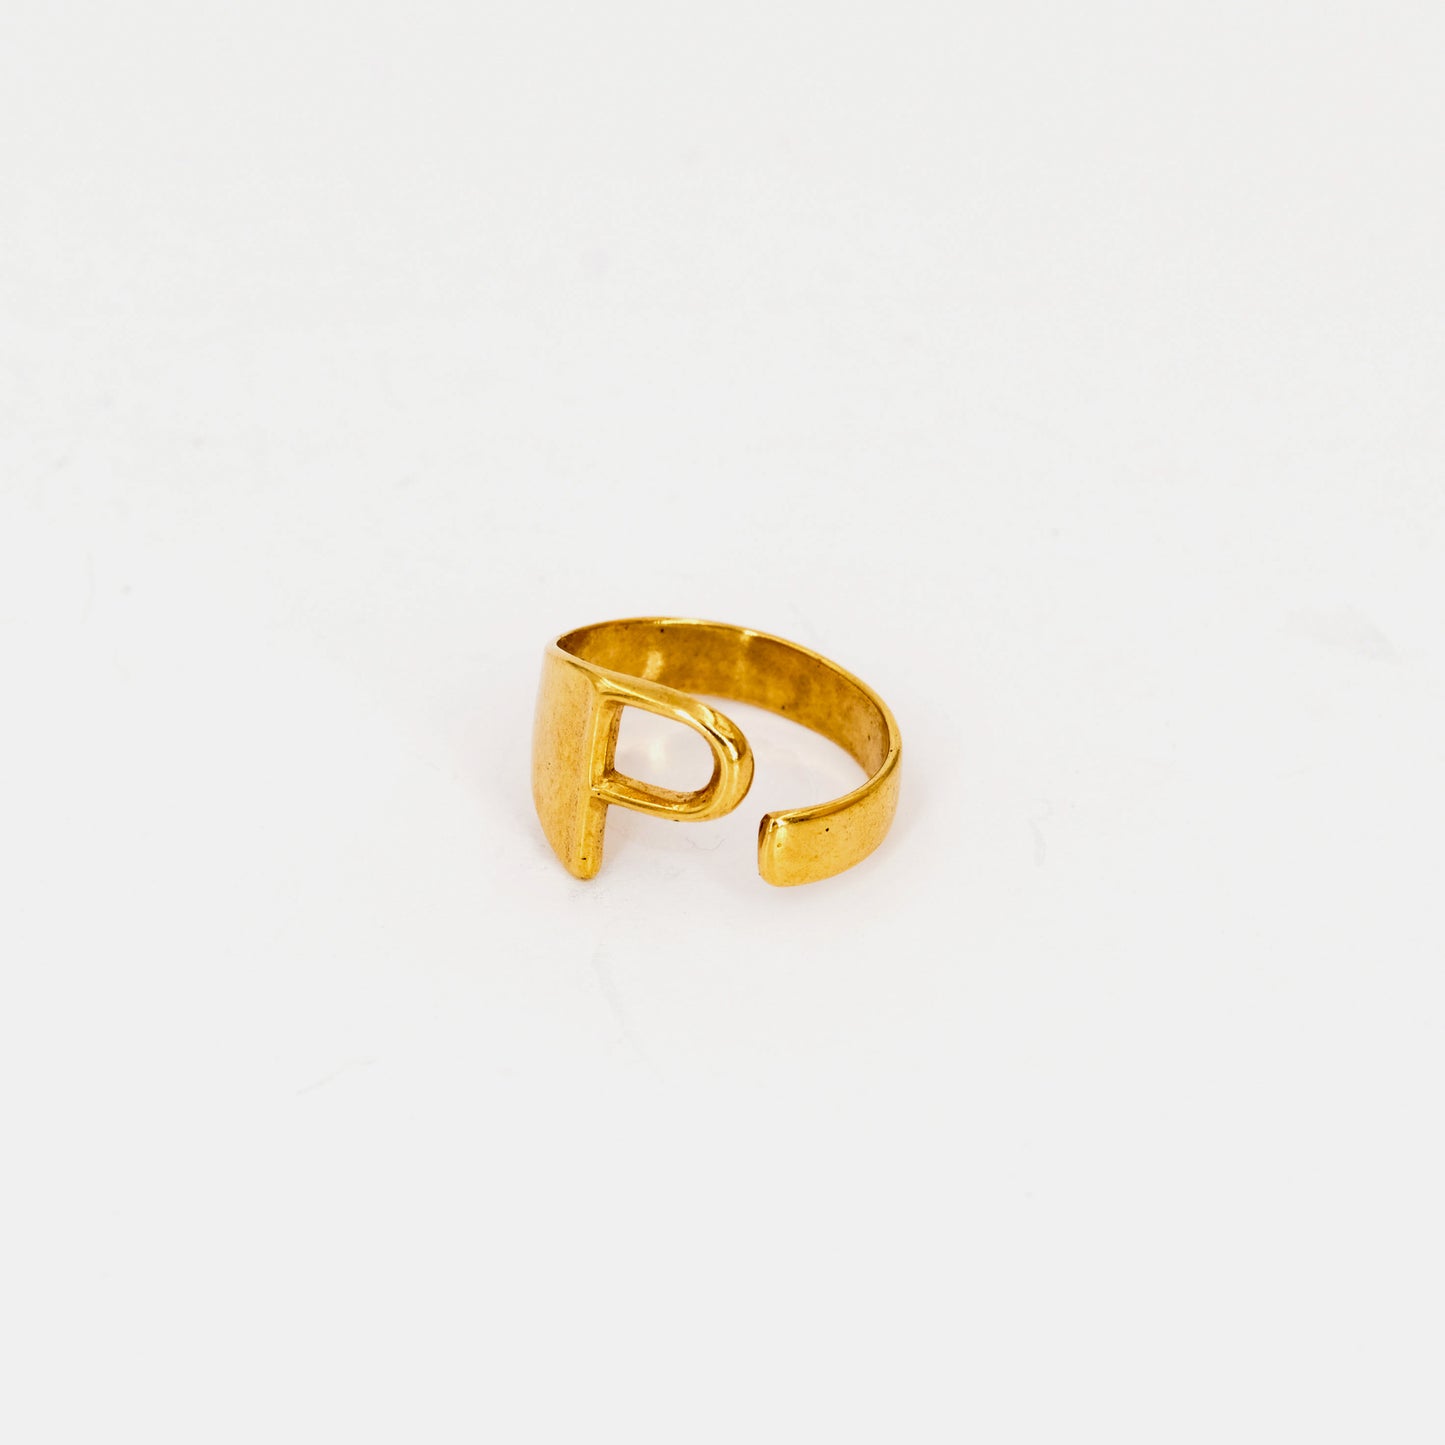 "Character" adjustable ring